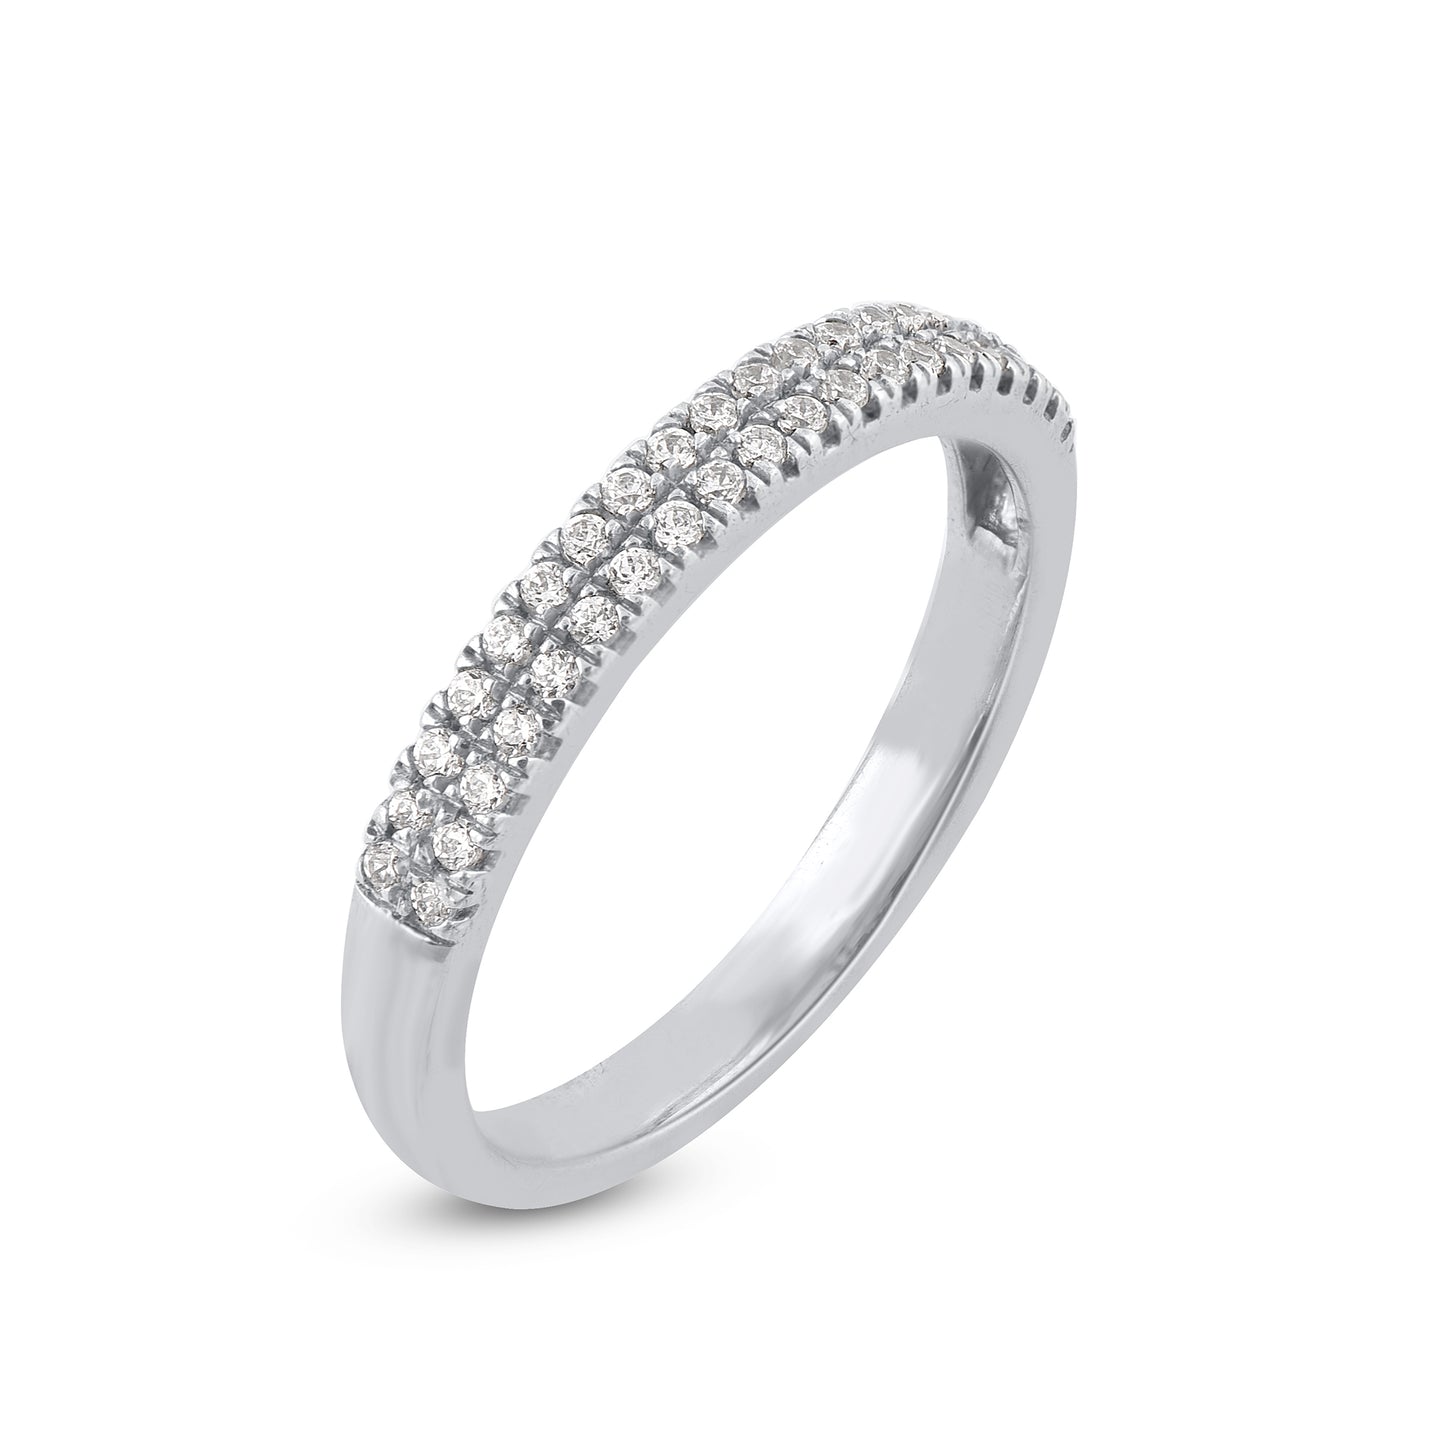 Two Lines Half Eternity Wedding Band in 10K White Gold